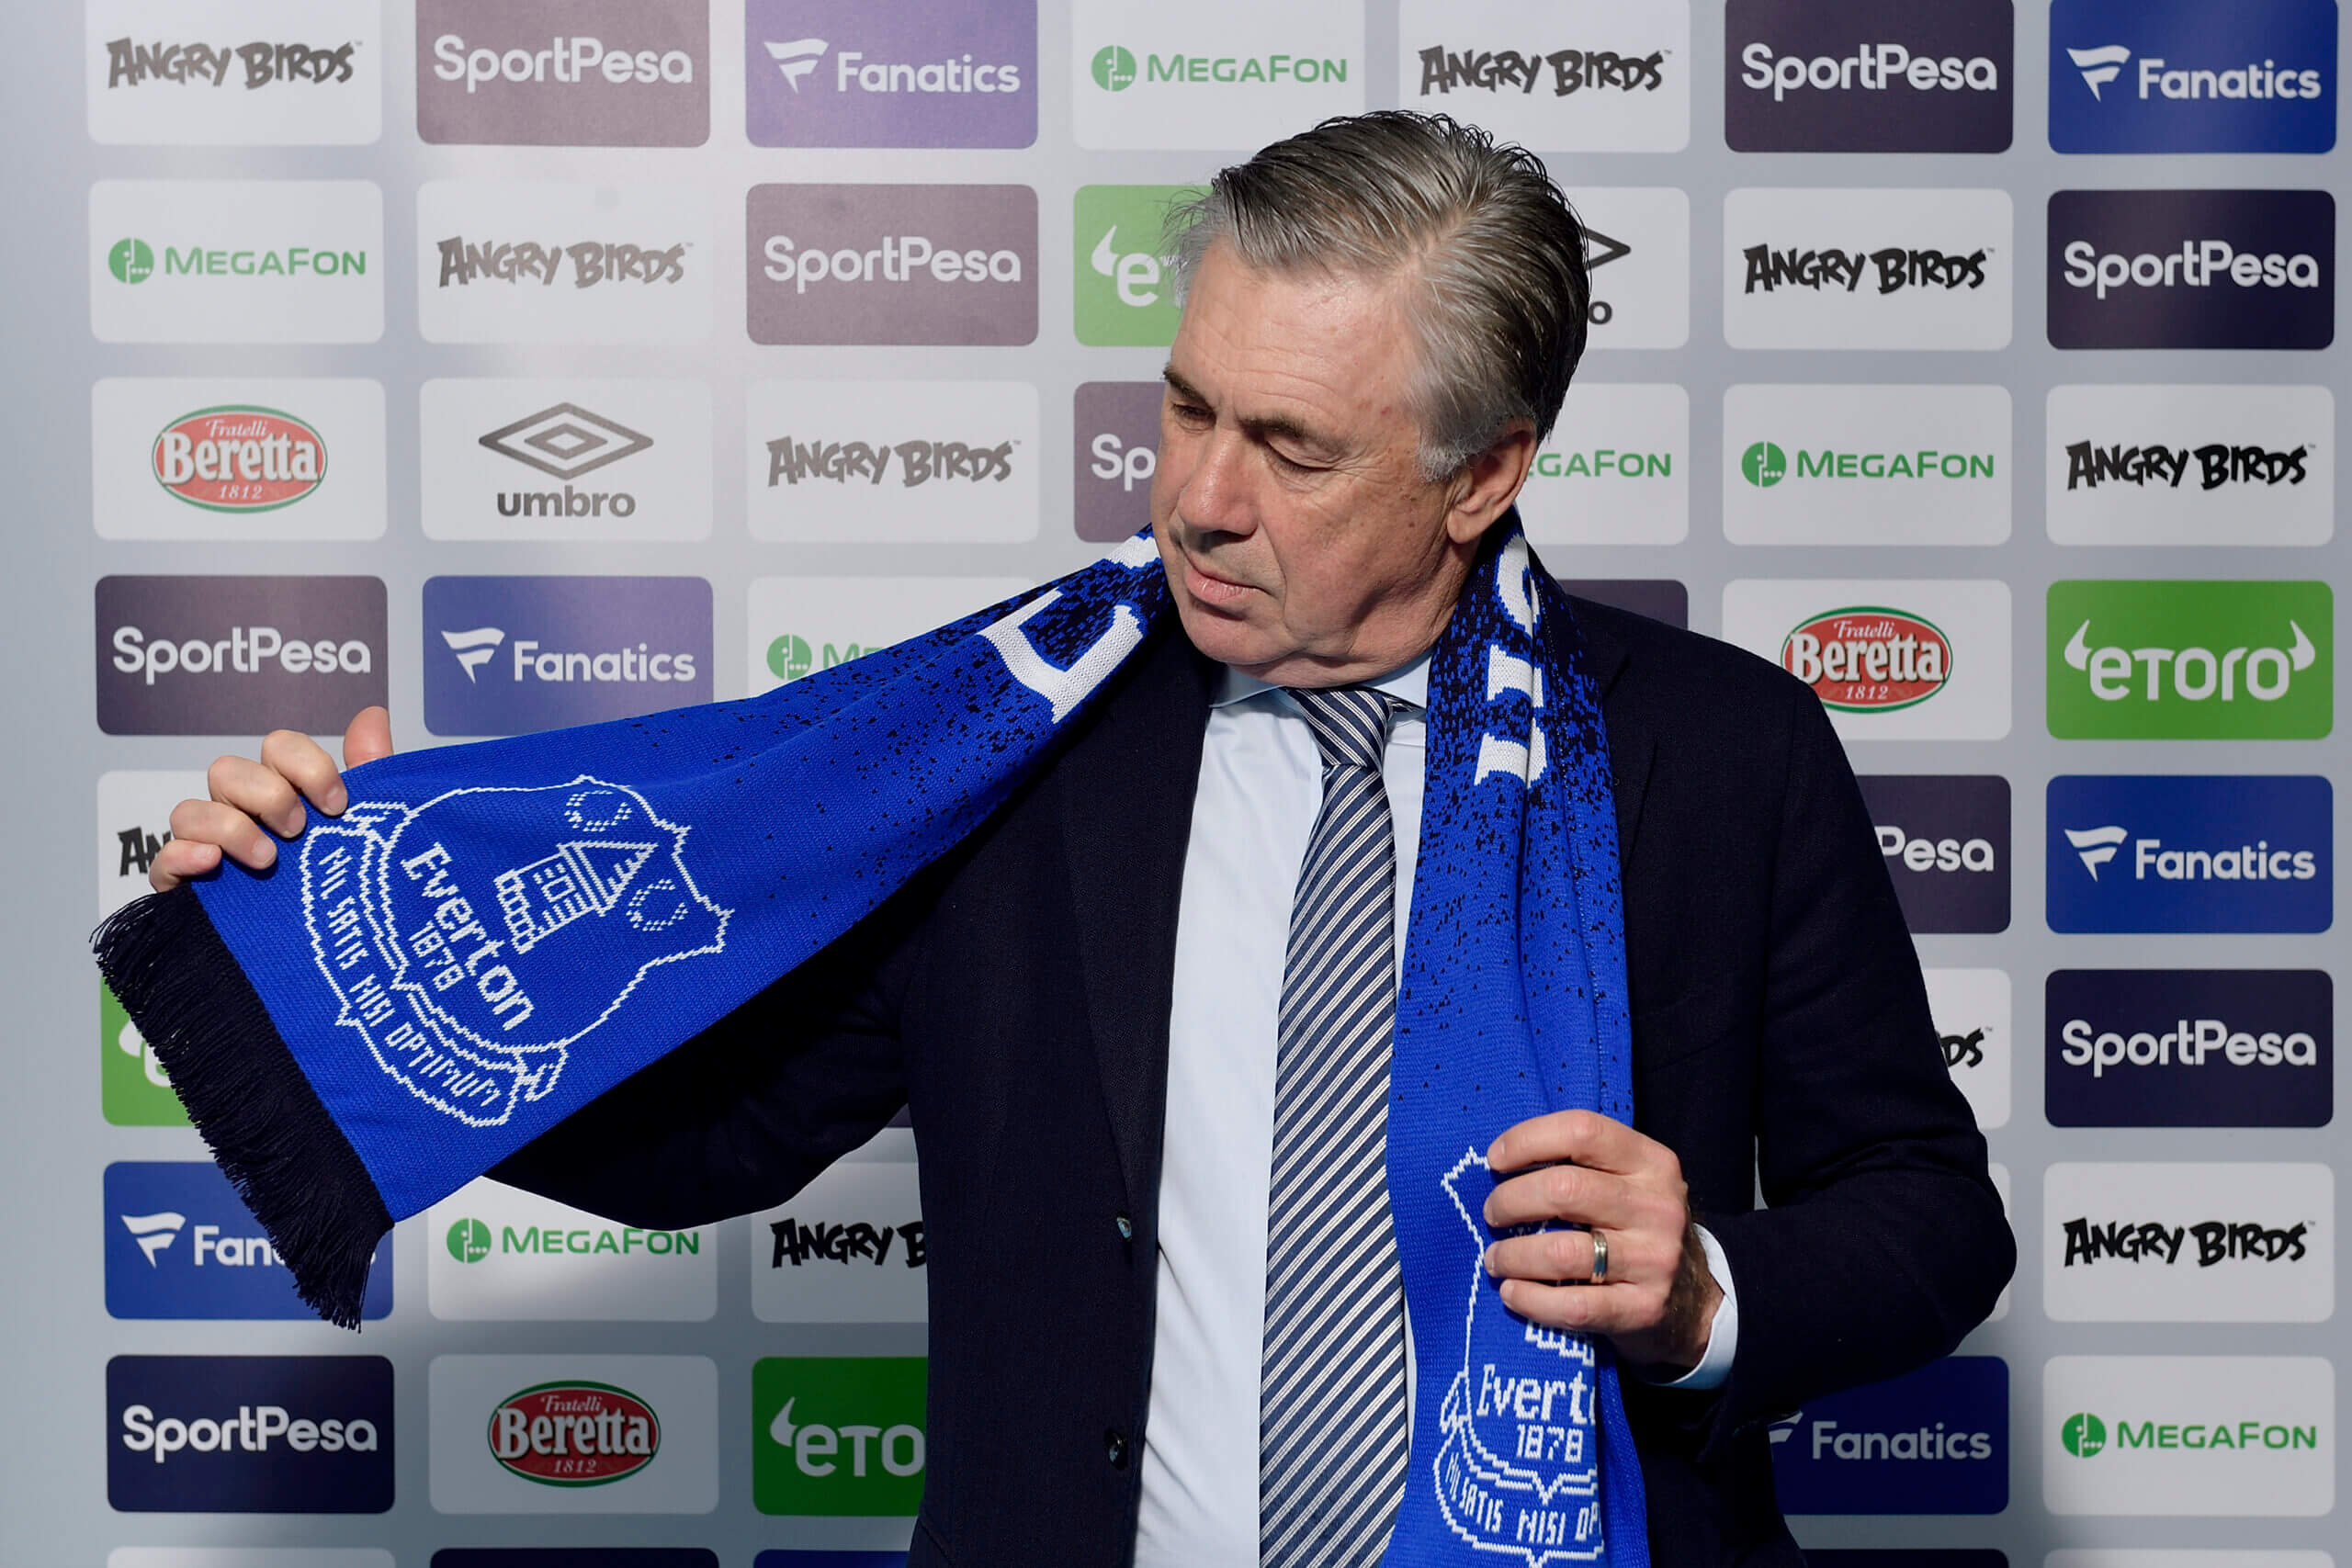 Carlo Ancelotti at Everton: Second at Christmas, a cup of tea and a bottle of Echo Falls